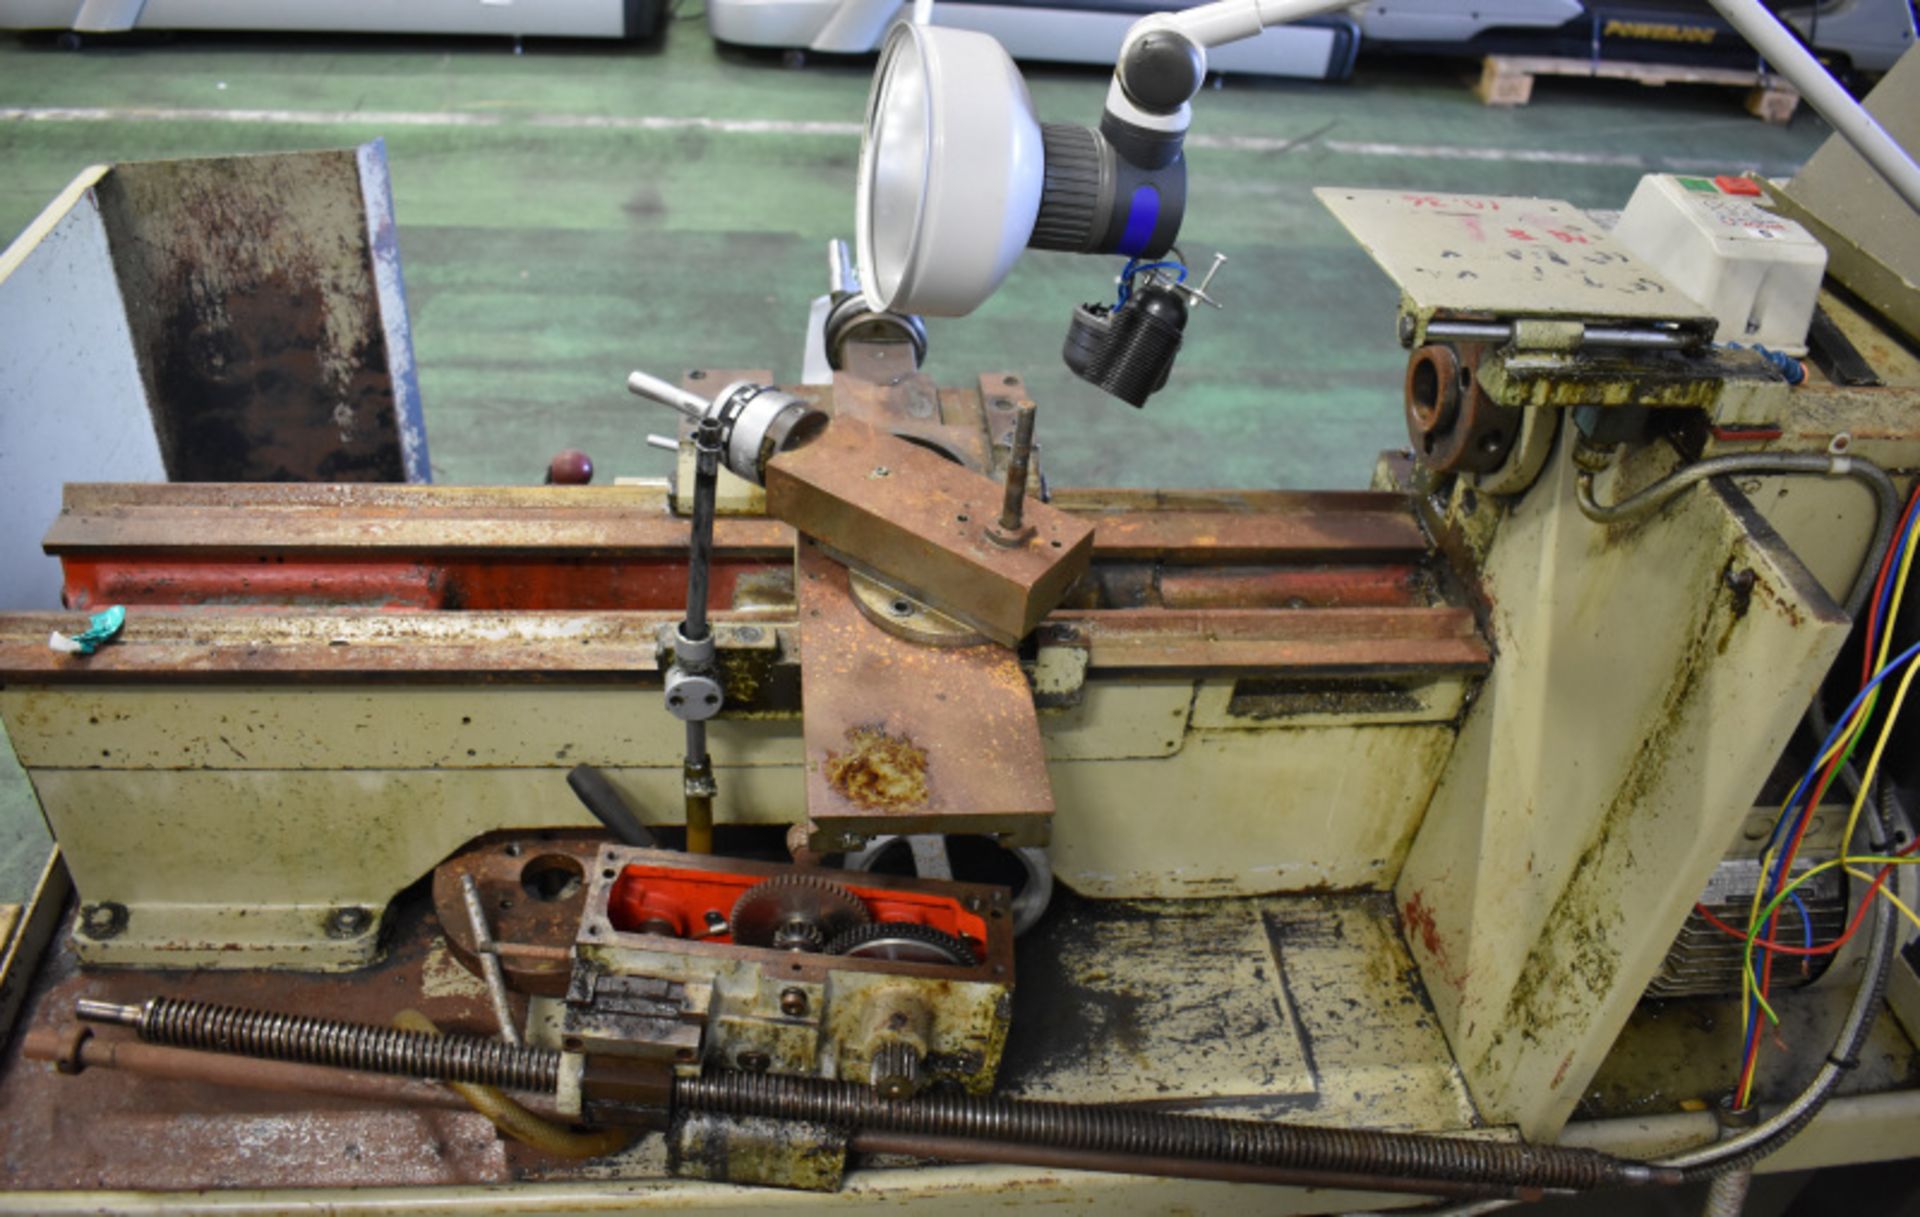 Harrison M300 Lathe L 1600mm x W 900mm x H 1270mm - no tooling or accessories - Image 12 of 13